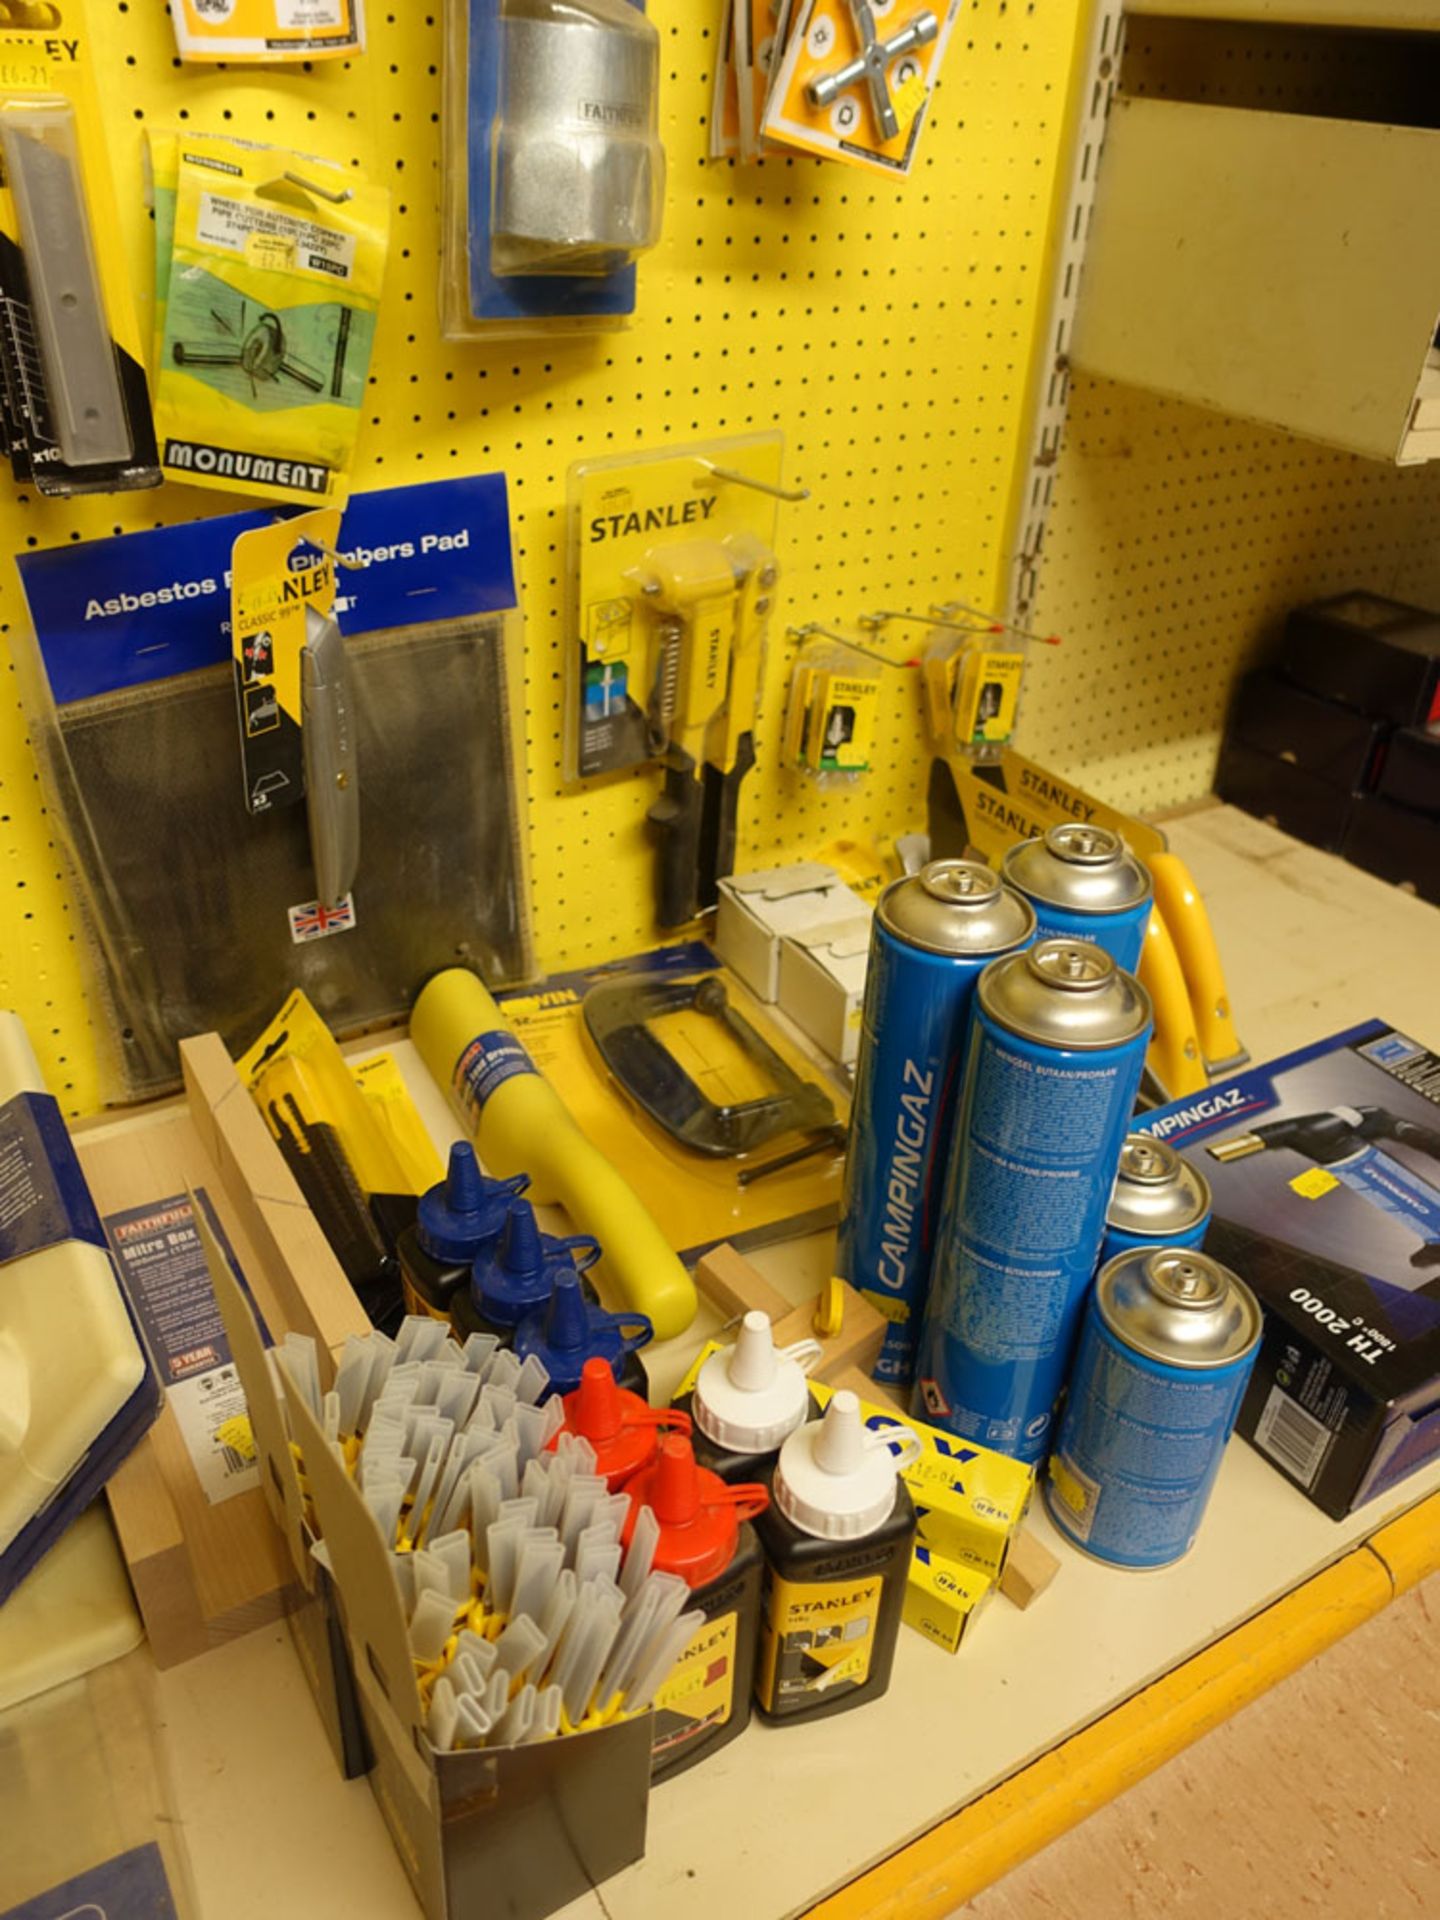 Range of hand tools including claw hammers, stapler, pliers, screwdrivers, spanners, plasterers - Image 3 of 4